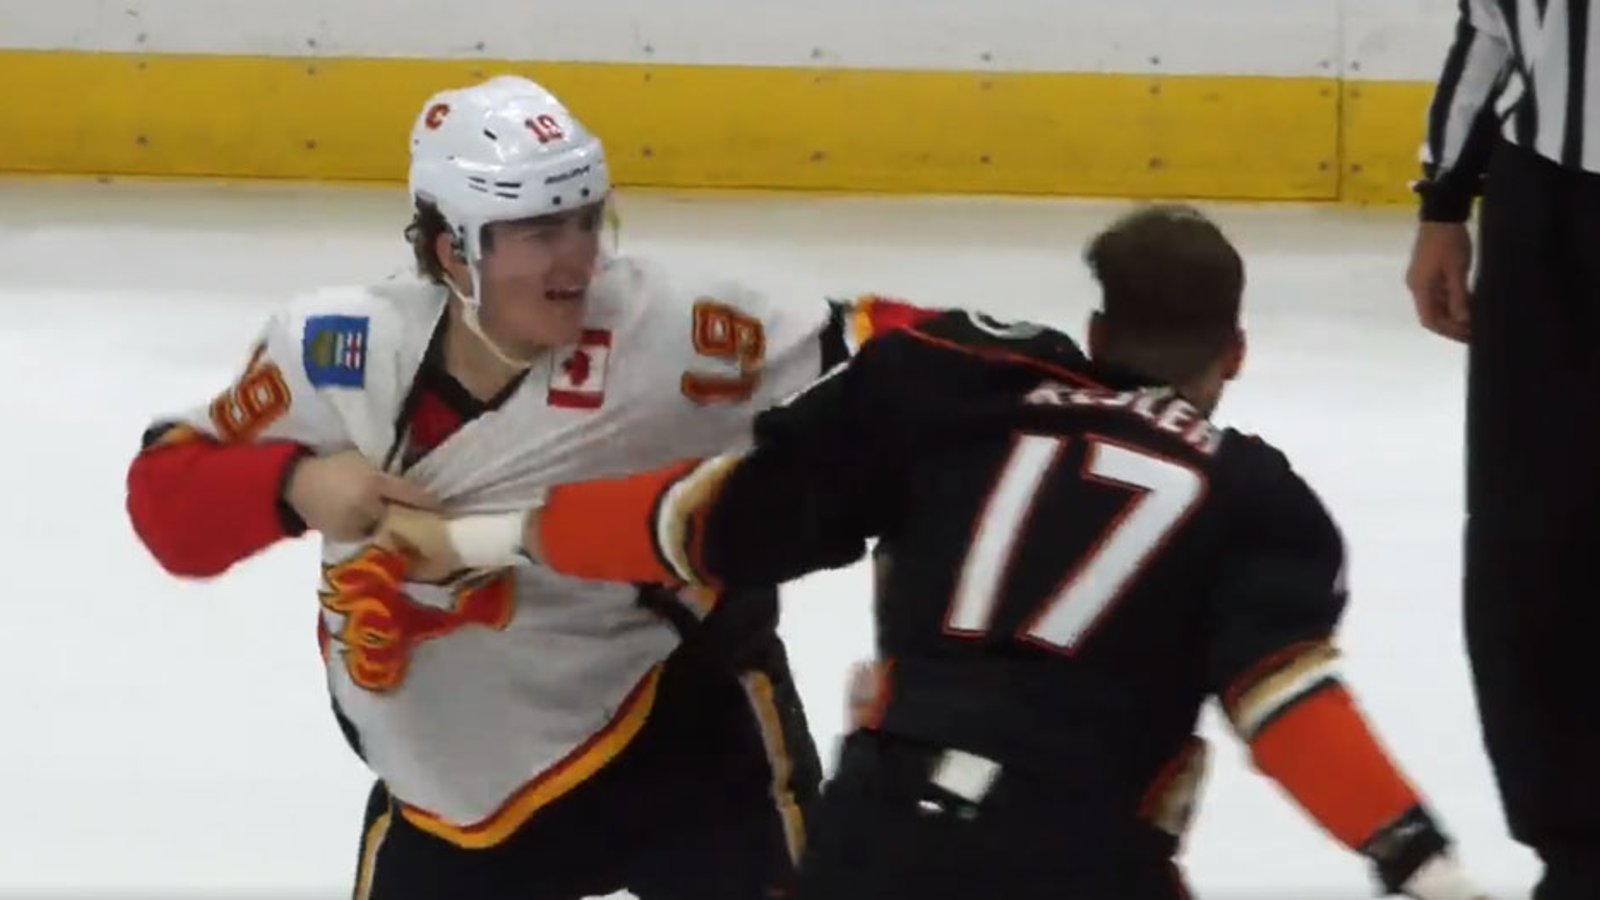 Kesler and Tkachuk drop the gloves in a titanic fight, both throw heavy punches!